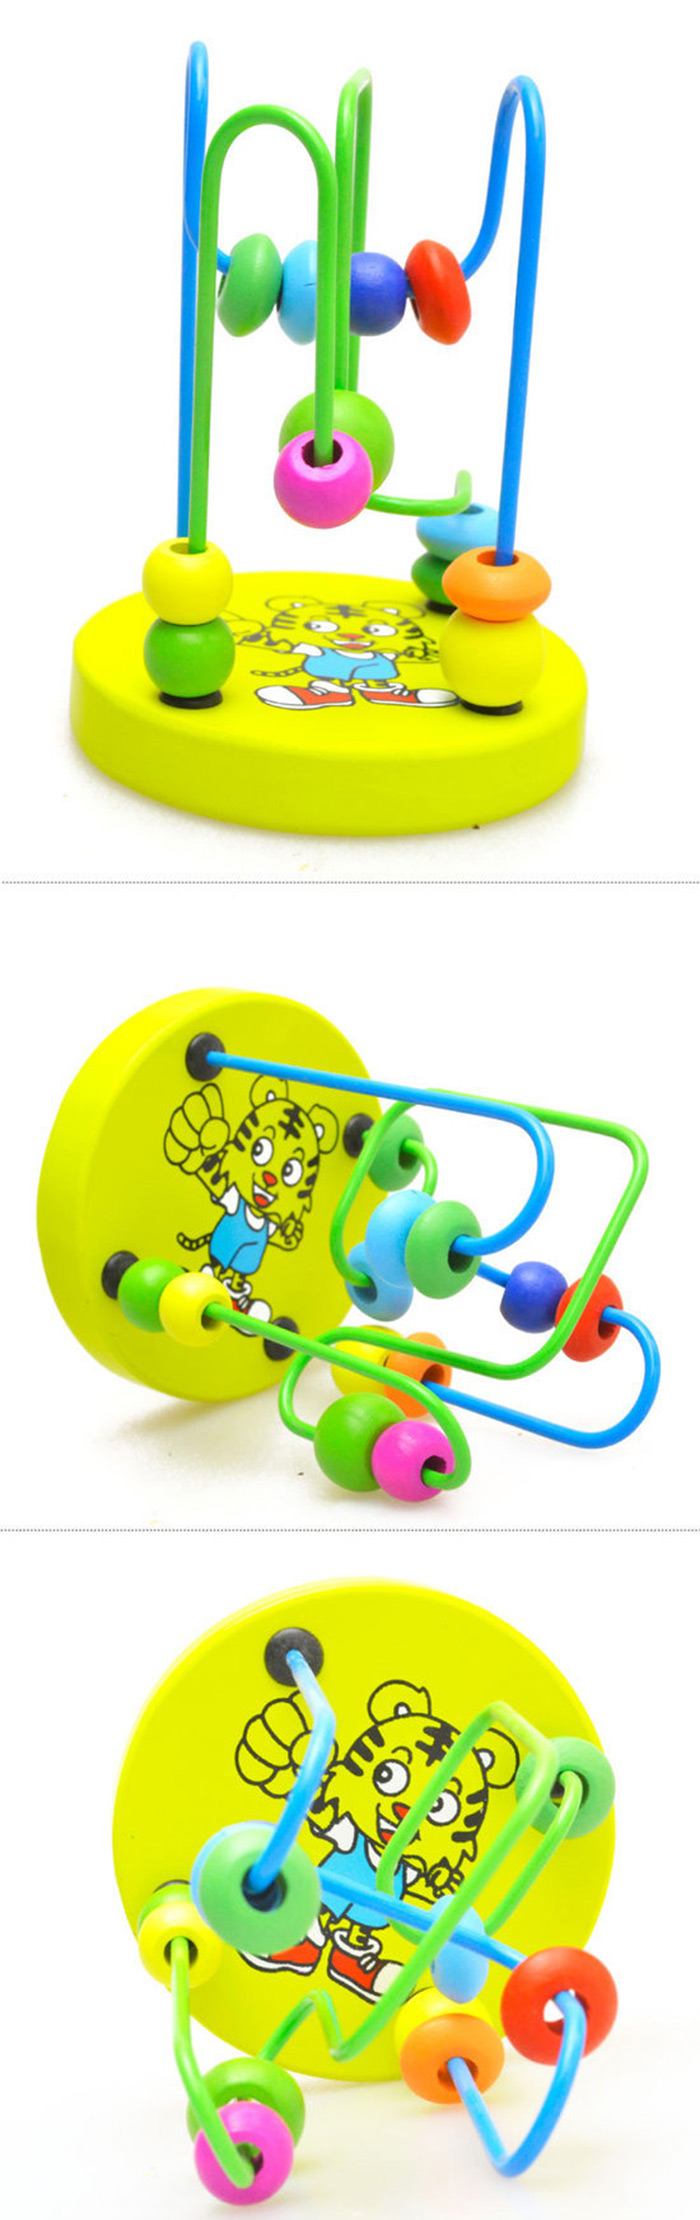 1 Piece Baby Colorful Wooden Around Beads Children Kids Educational Game Toy